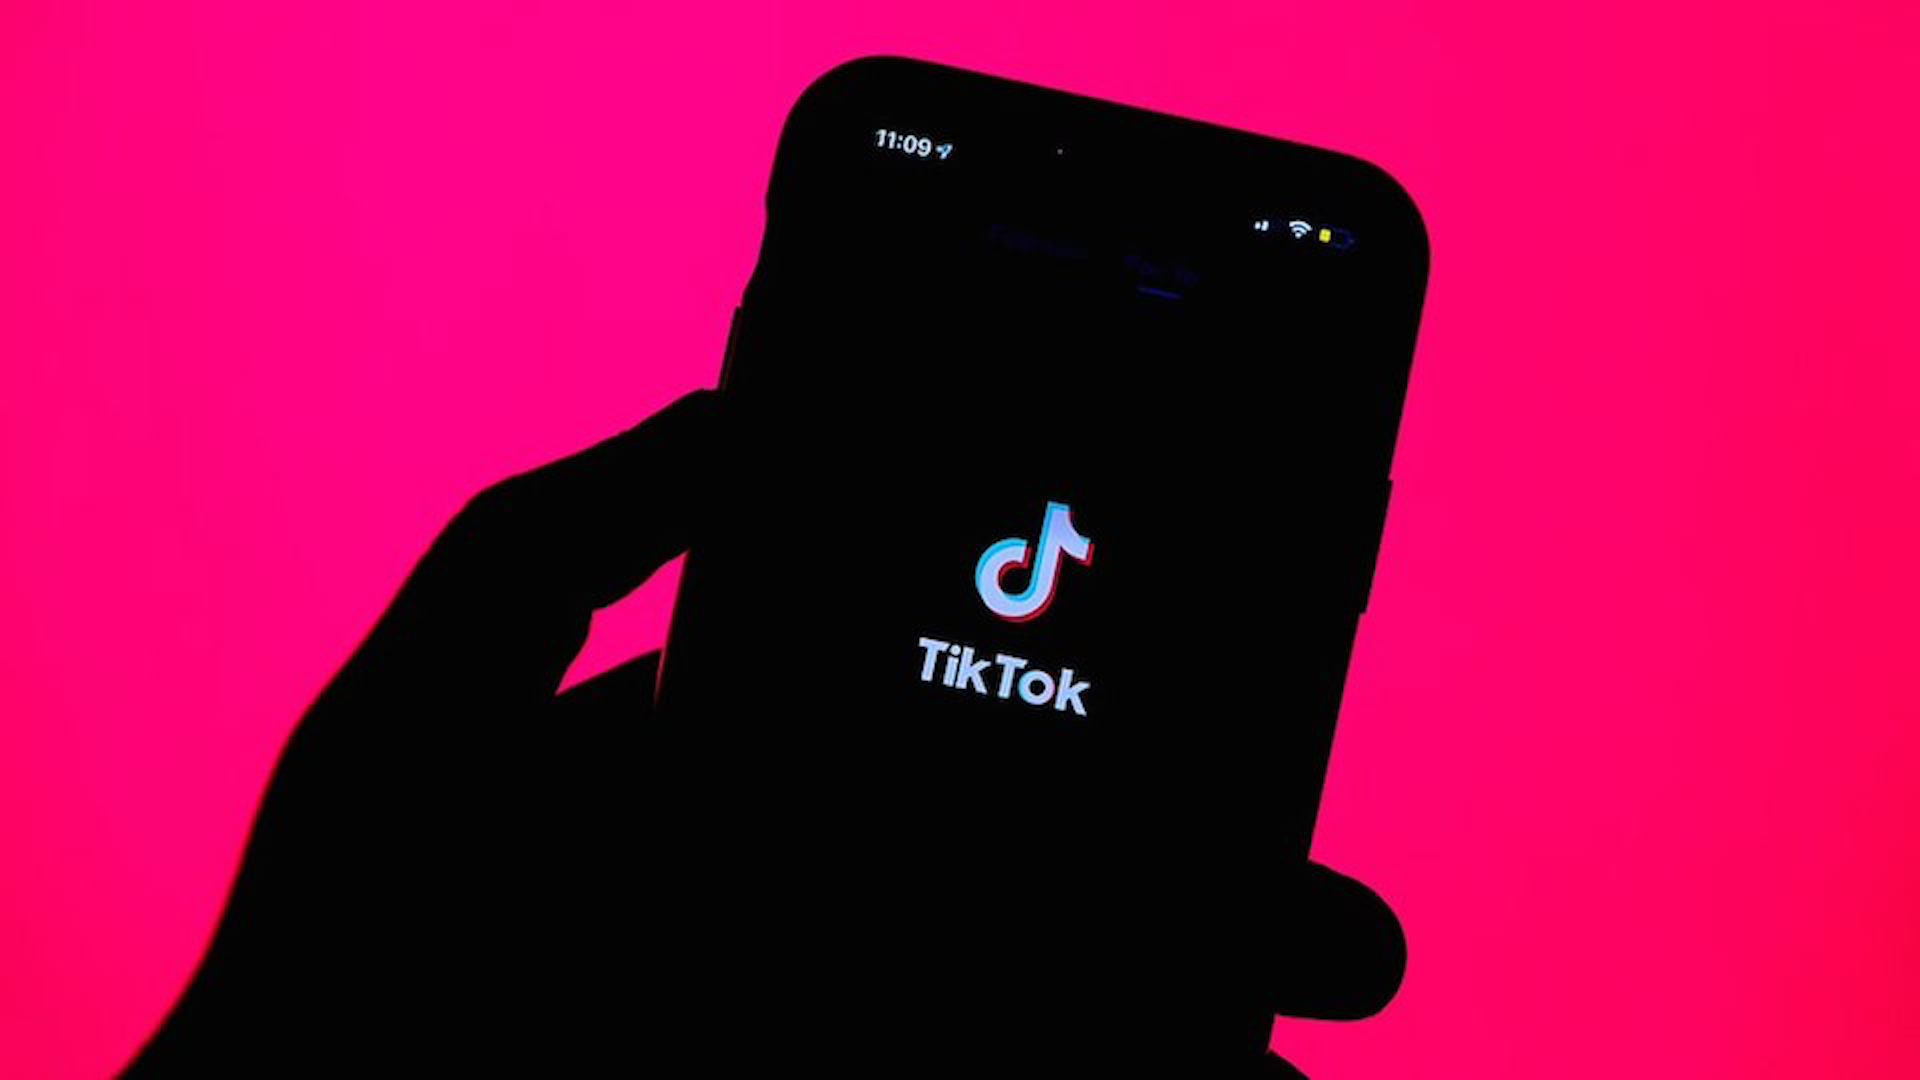 Dance your way to TikTok fame with this catchy songs list from 2021